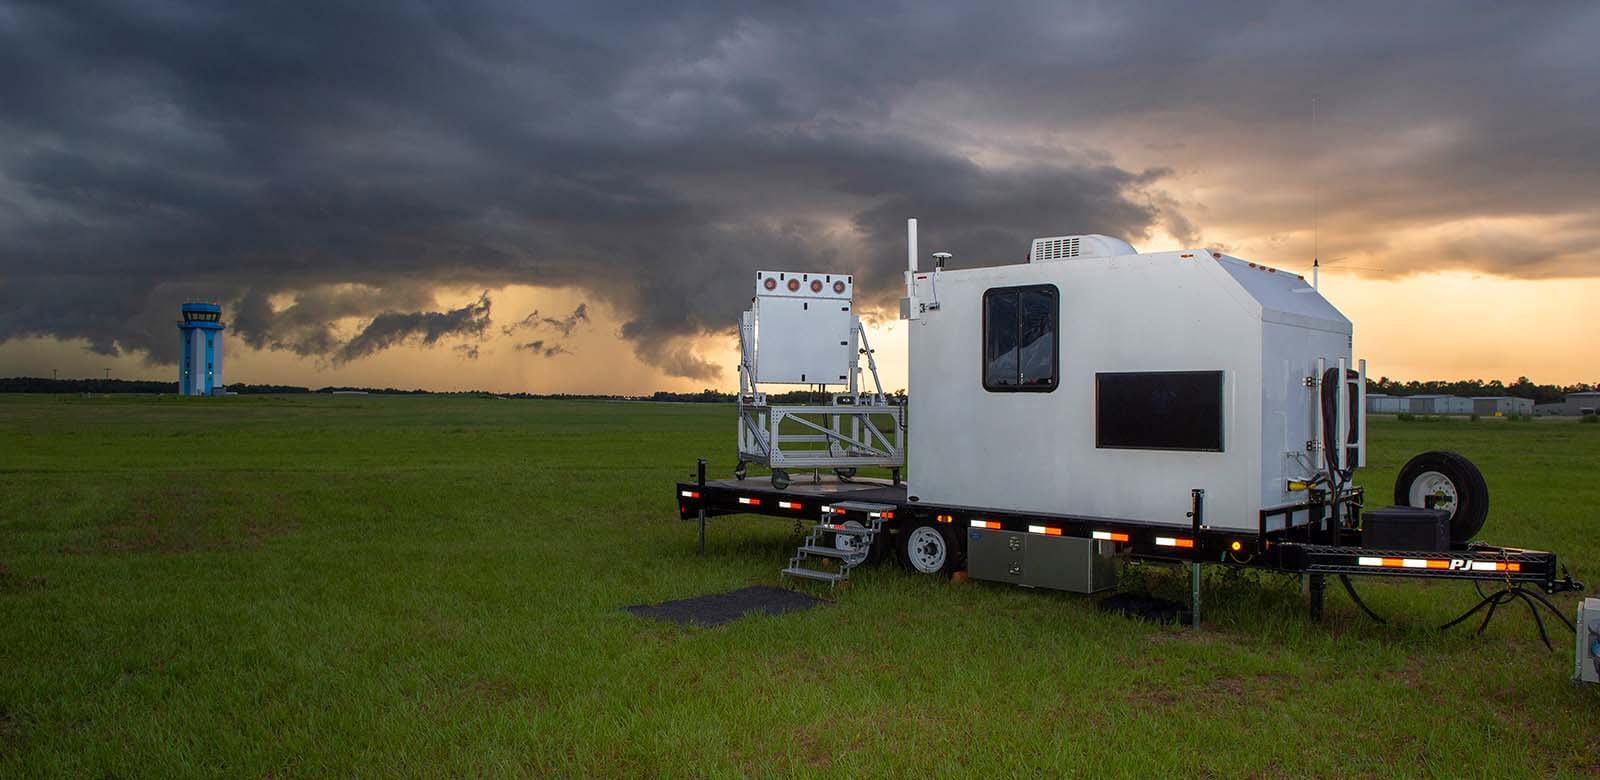 a trailer with a radar unit surveilling the airspace